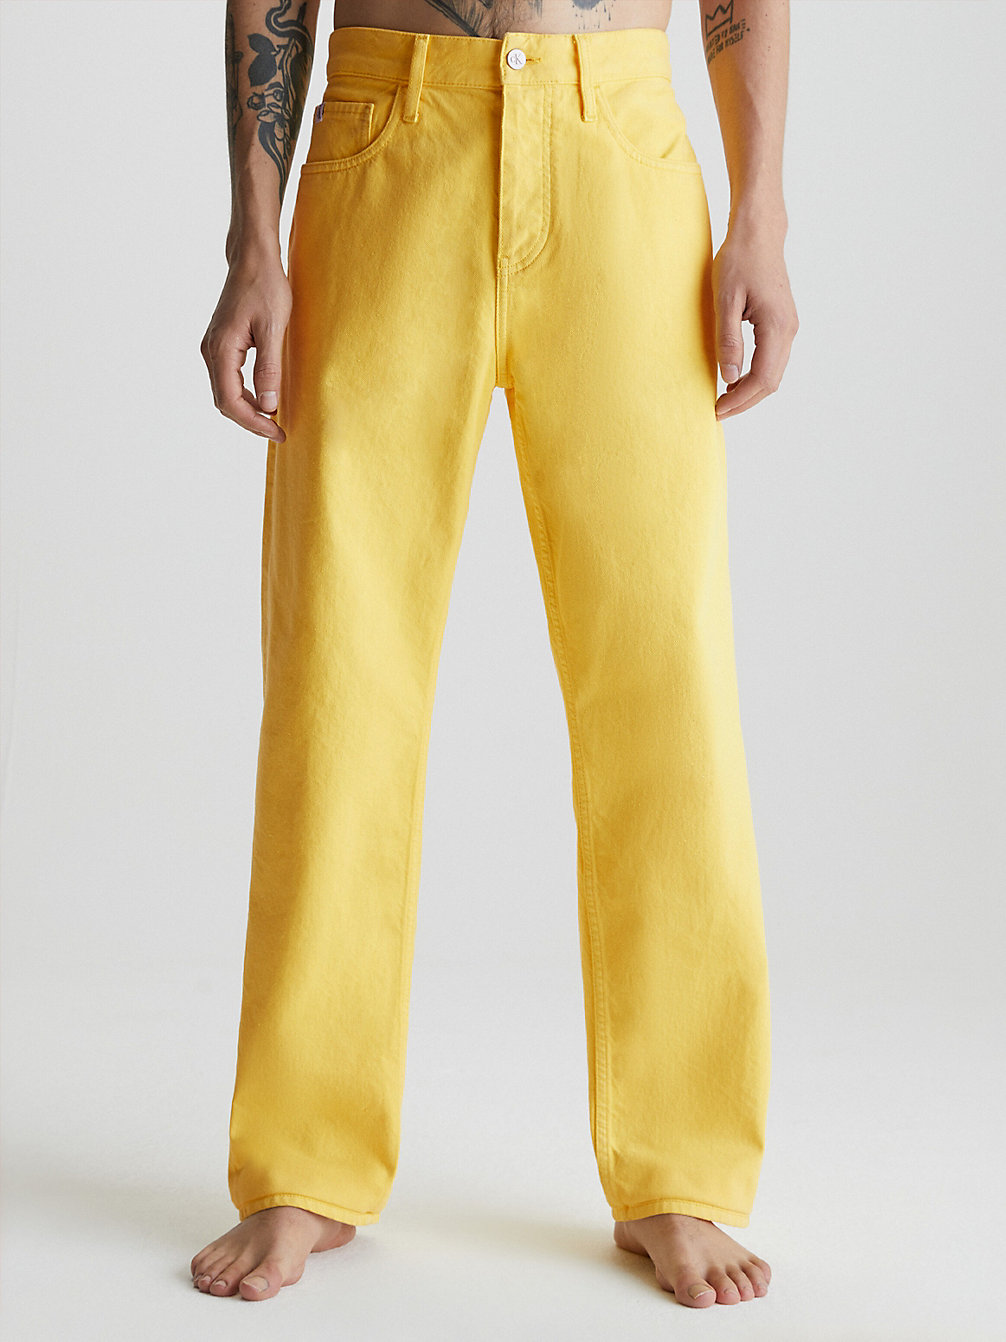 90's Straight Jeans > PRIMROSE YELLOW > undefined hombre > Calvin Klein